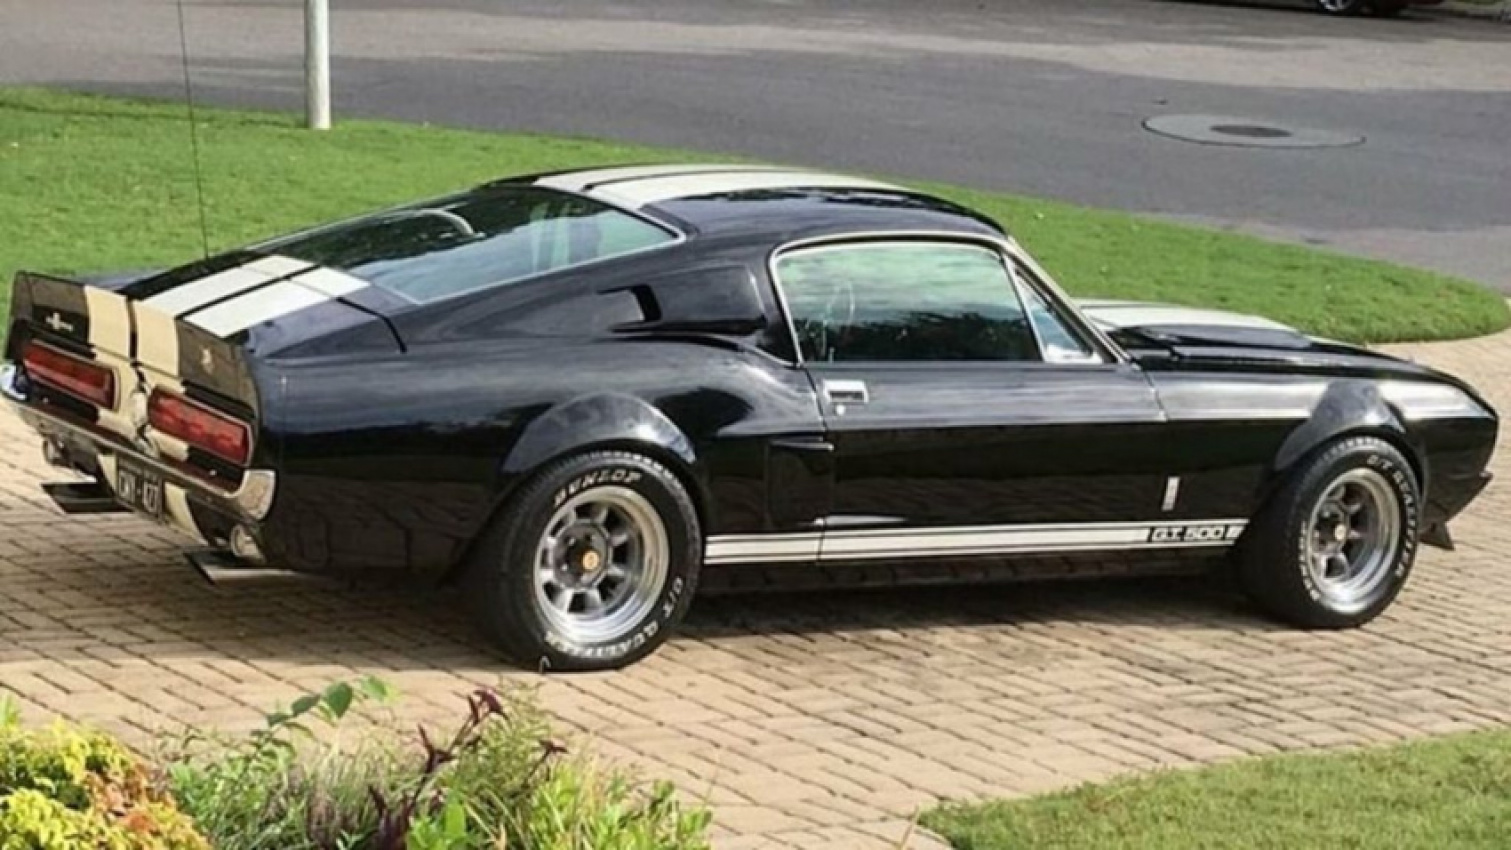 autos, cars, shelby, mustang, stolen car, stolen 1967 shelby mustang gt500 found in a field – and it ain’t pretty